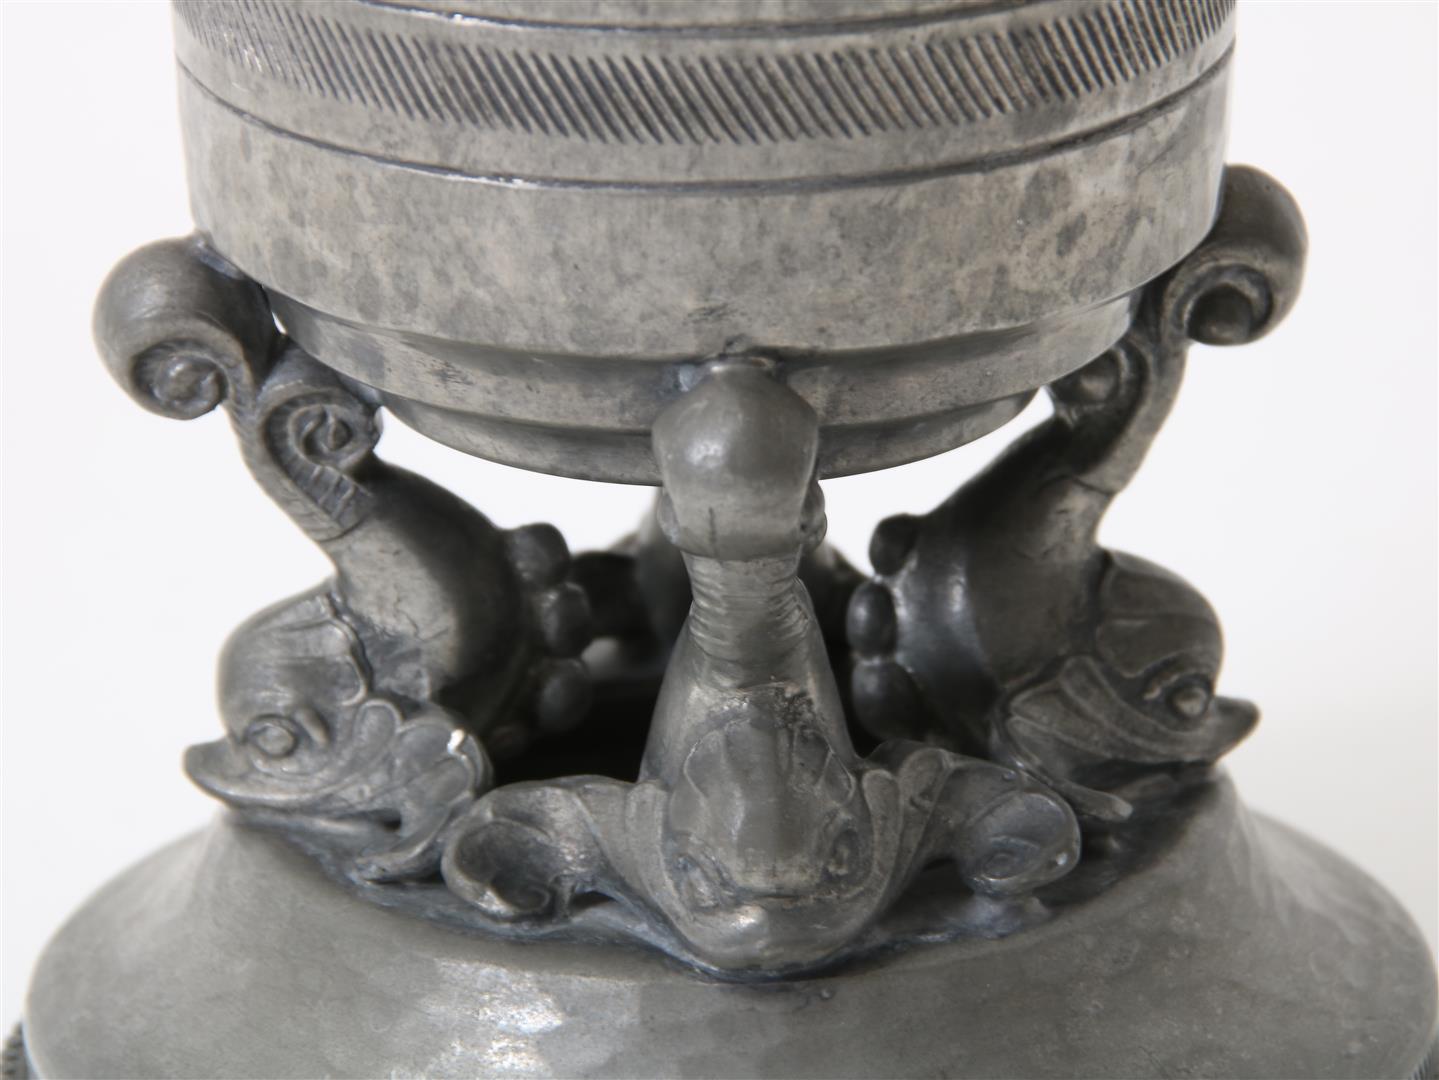 Lot of an Art Deco pewter vase on an openwork base, ashtray, candlestick and vase with Cockatoos, - Image 5 of 6